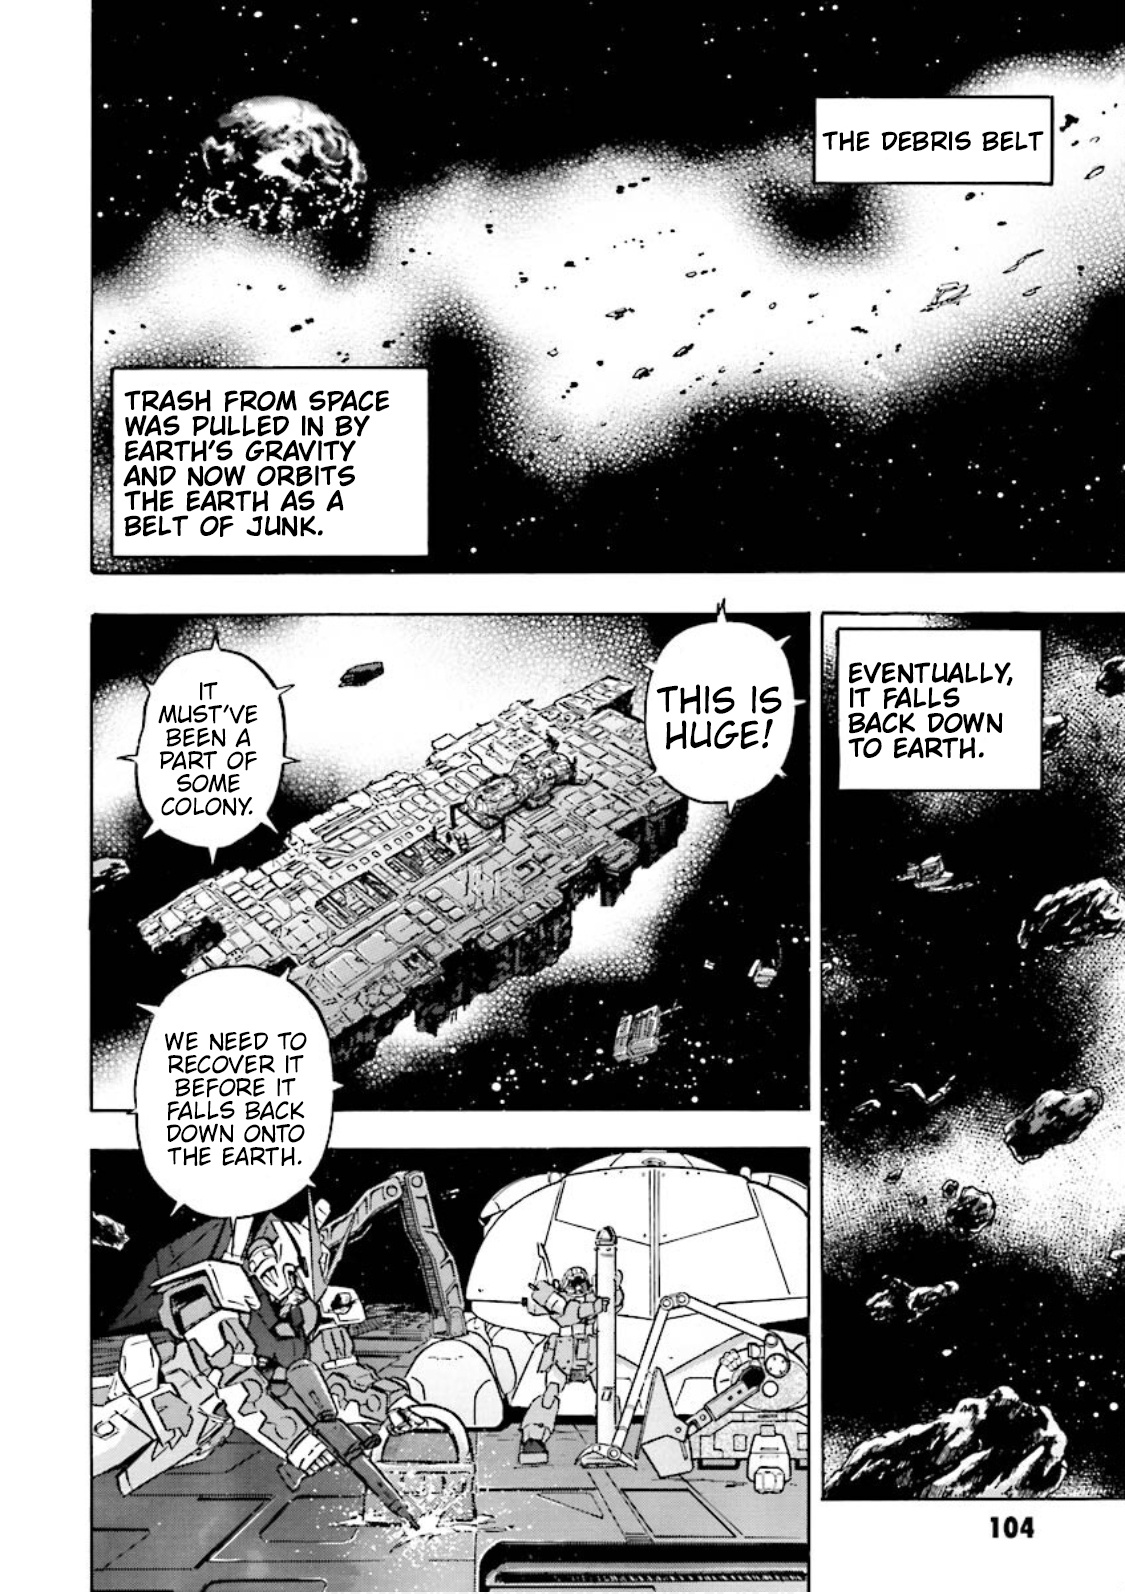 Mobile Suit Gundam Seed Astray Re:master Edition Chapter 8 #9